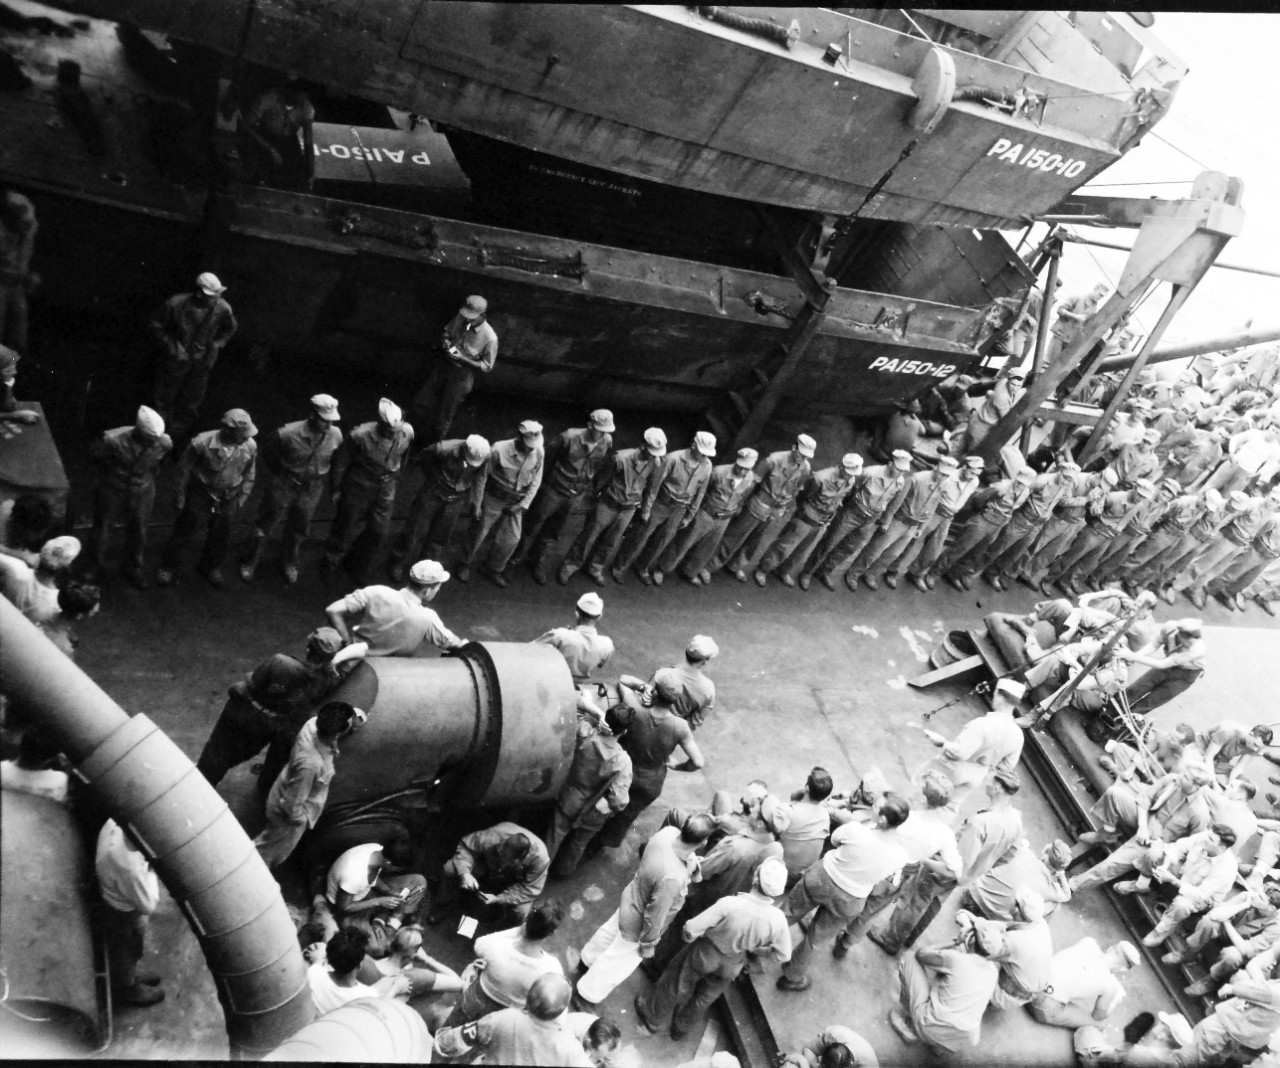 127-GW-224-225168:  Okinawa Campaign, Purple-Hearts, September 30, 1945.   USS Bergen (APA-150).   Purple Hearts being awarded to Marines of Engineer Company, Second Battalion (d1).  Total of 25 men received for wounds on Okinawa.   Awards were given en-route to China.   Photographed by Huntington, September 30, 1945.  Official U.S. Marine Corps Photograph, now in the collection of the National Archives.  (2015/5/5). 